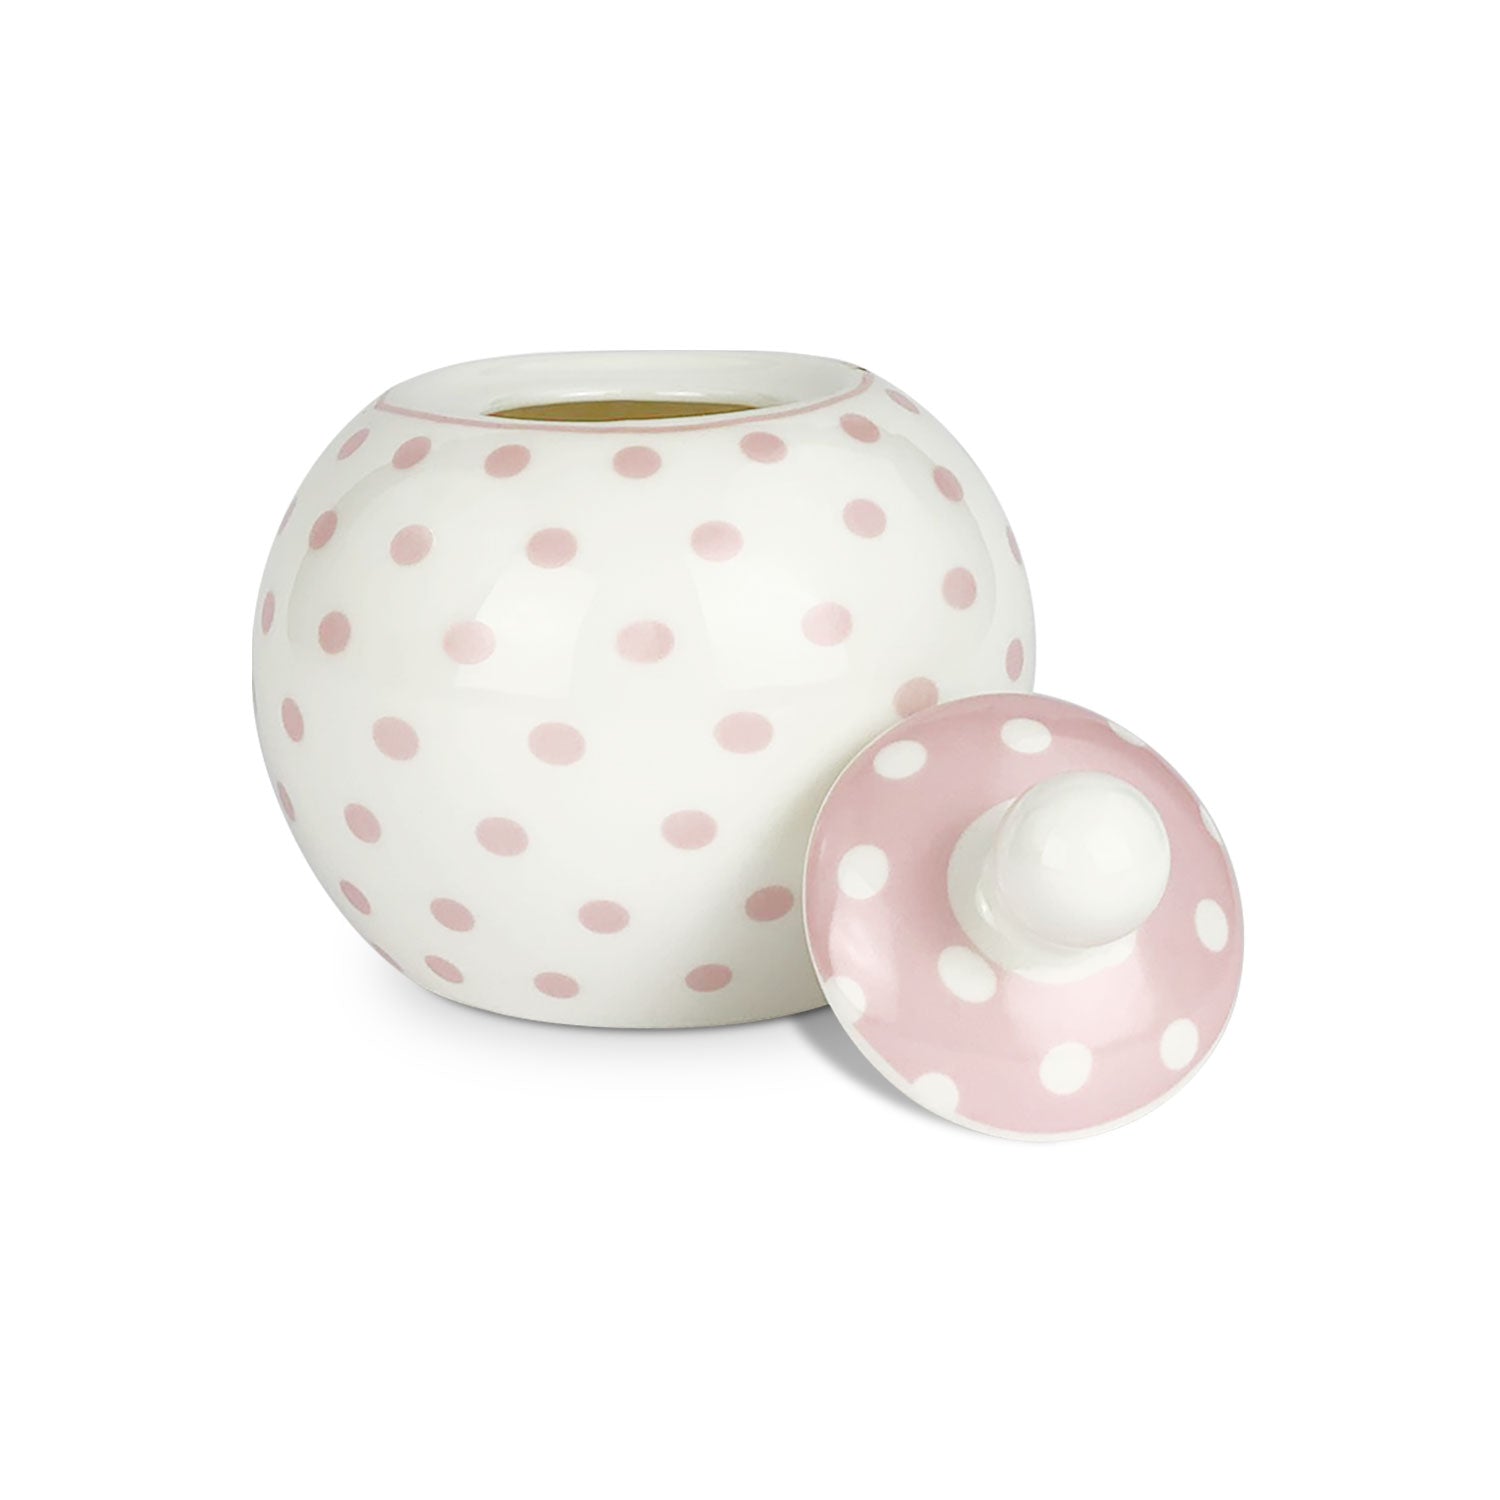 Zuccheriera in porcellana Isabelle Rose a pois Shabby chic rotonda 5065